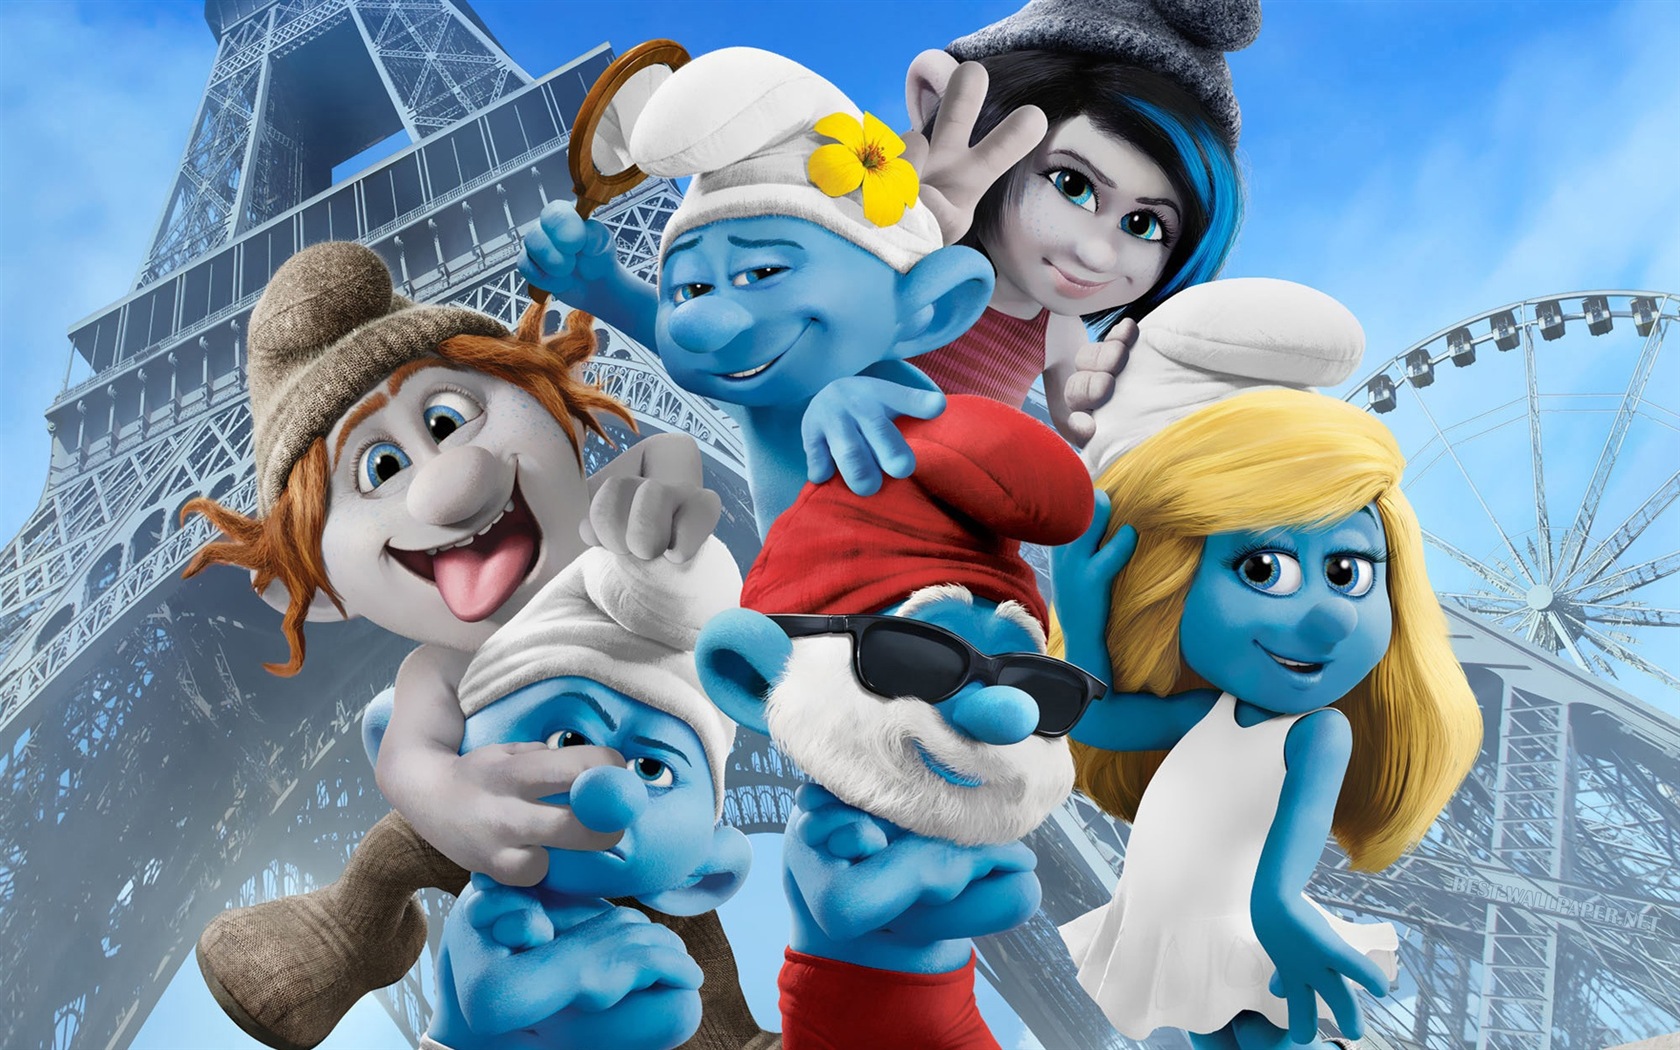 The Smurfs 2 HD movie wallpapers #7 - 1680x1050